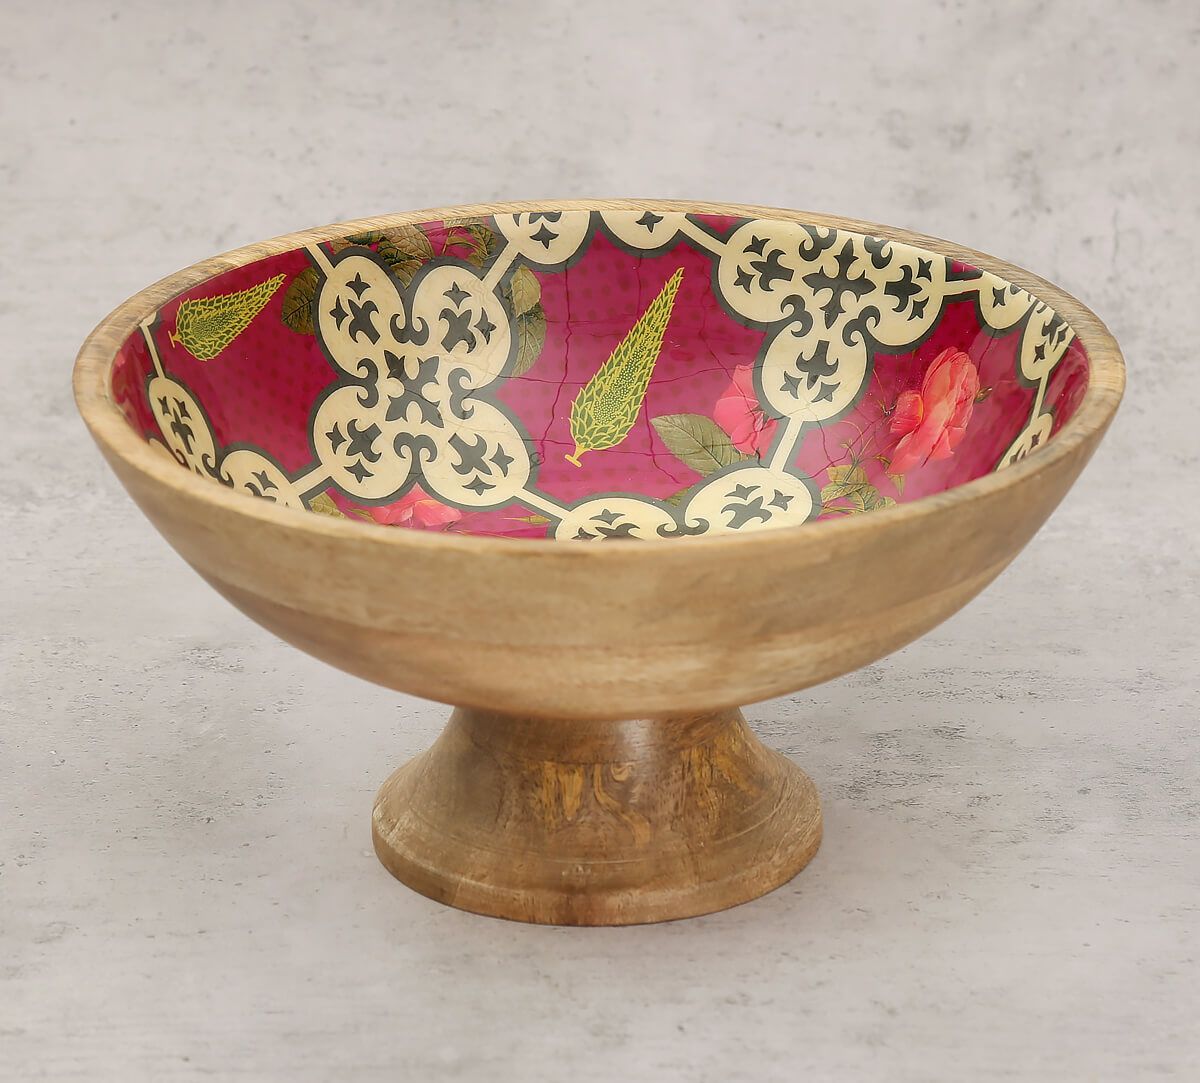 India Circus by Krsnaa Mehta Clover's Knotty Play Fruit Bowl